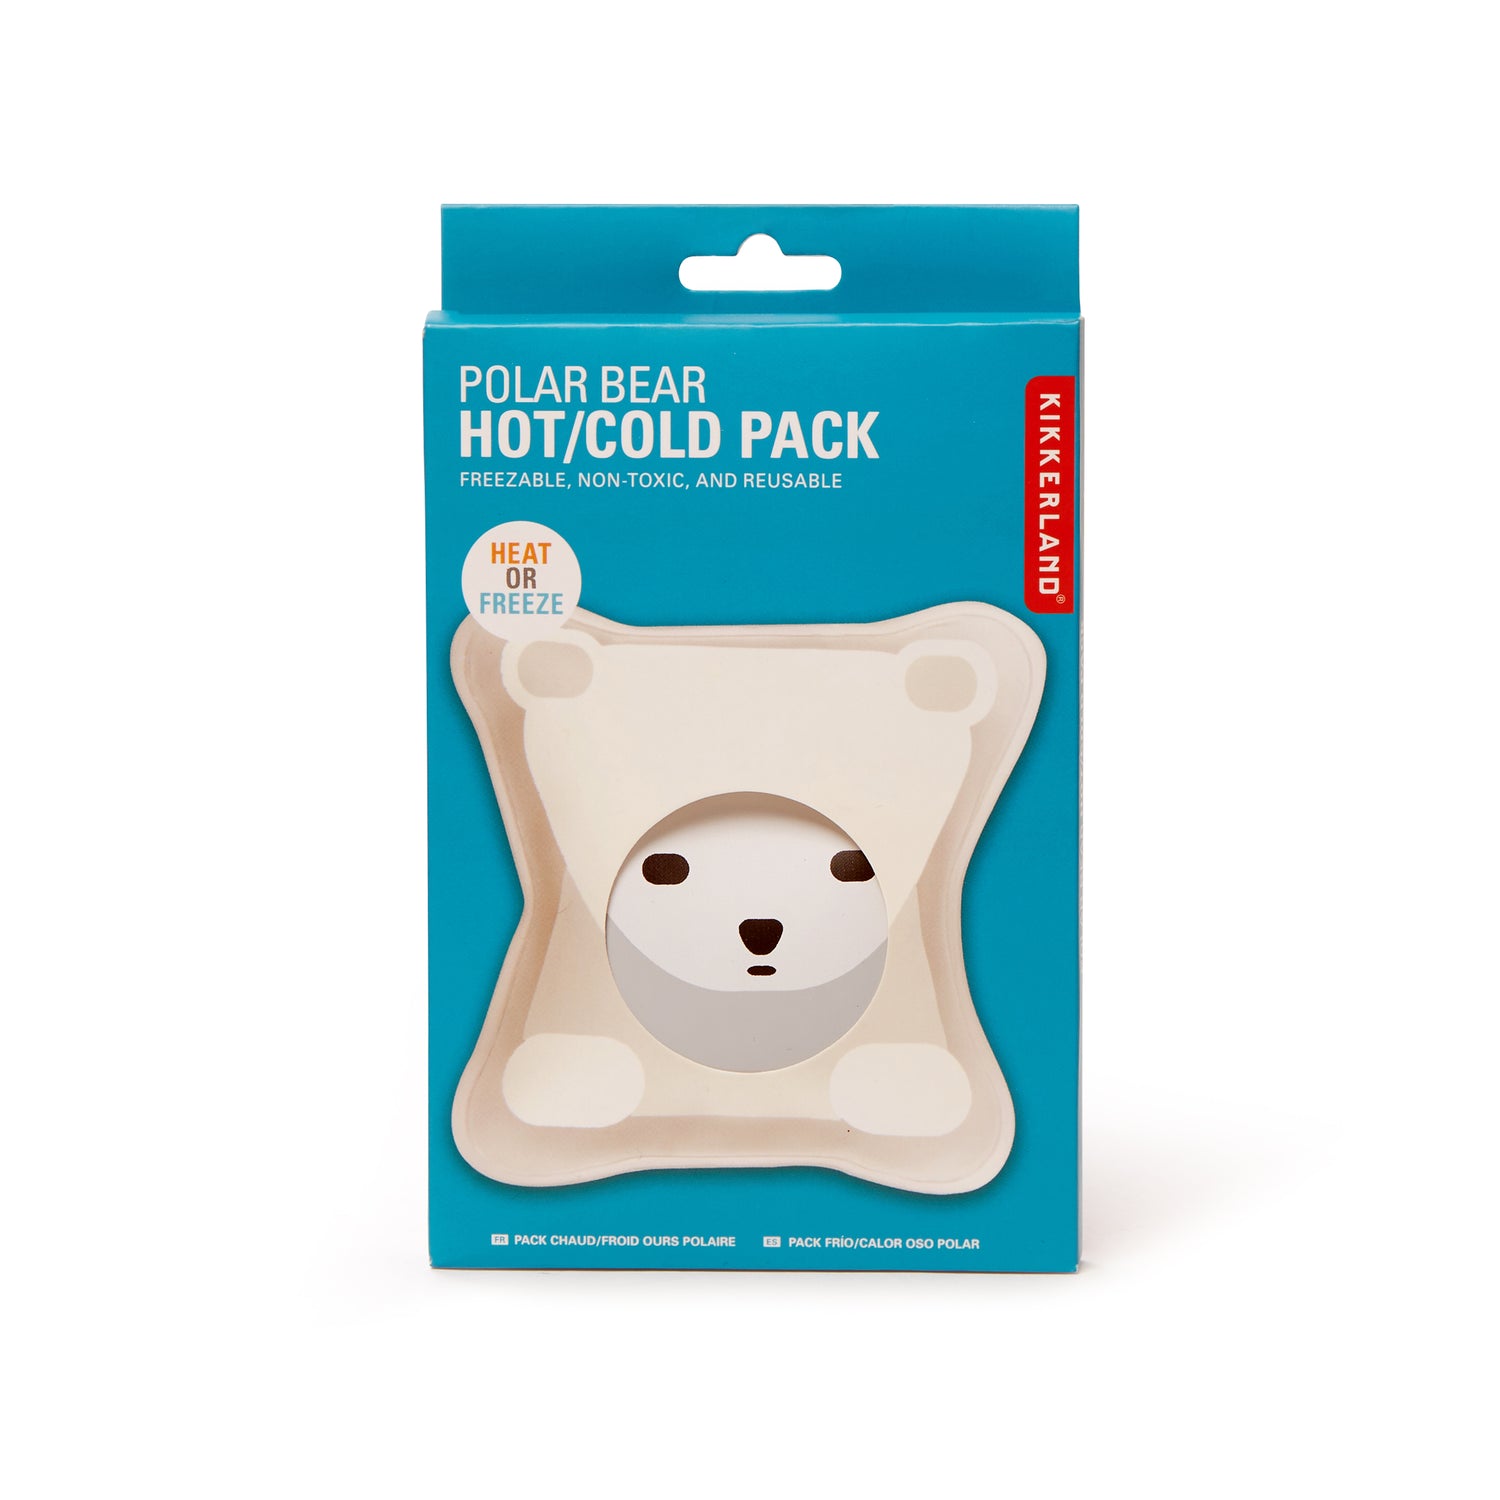 Pack chaud/froid ours polaire